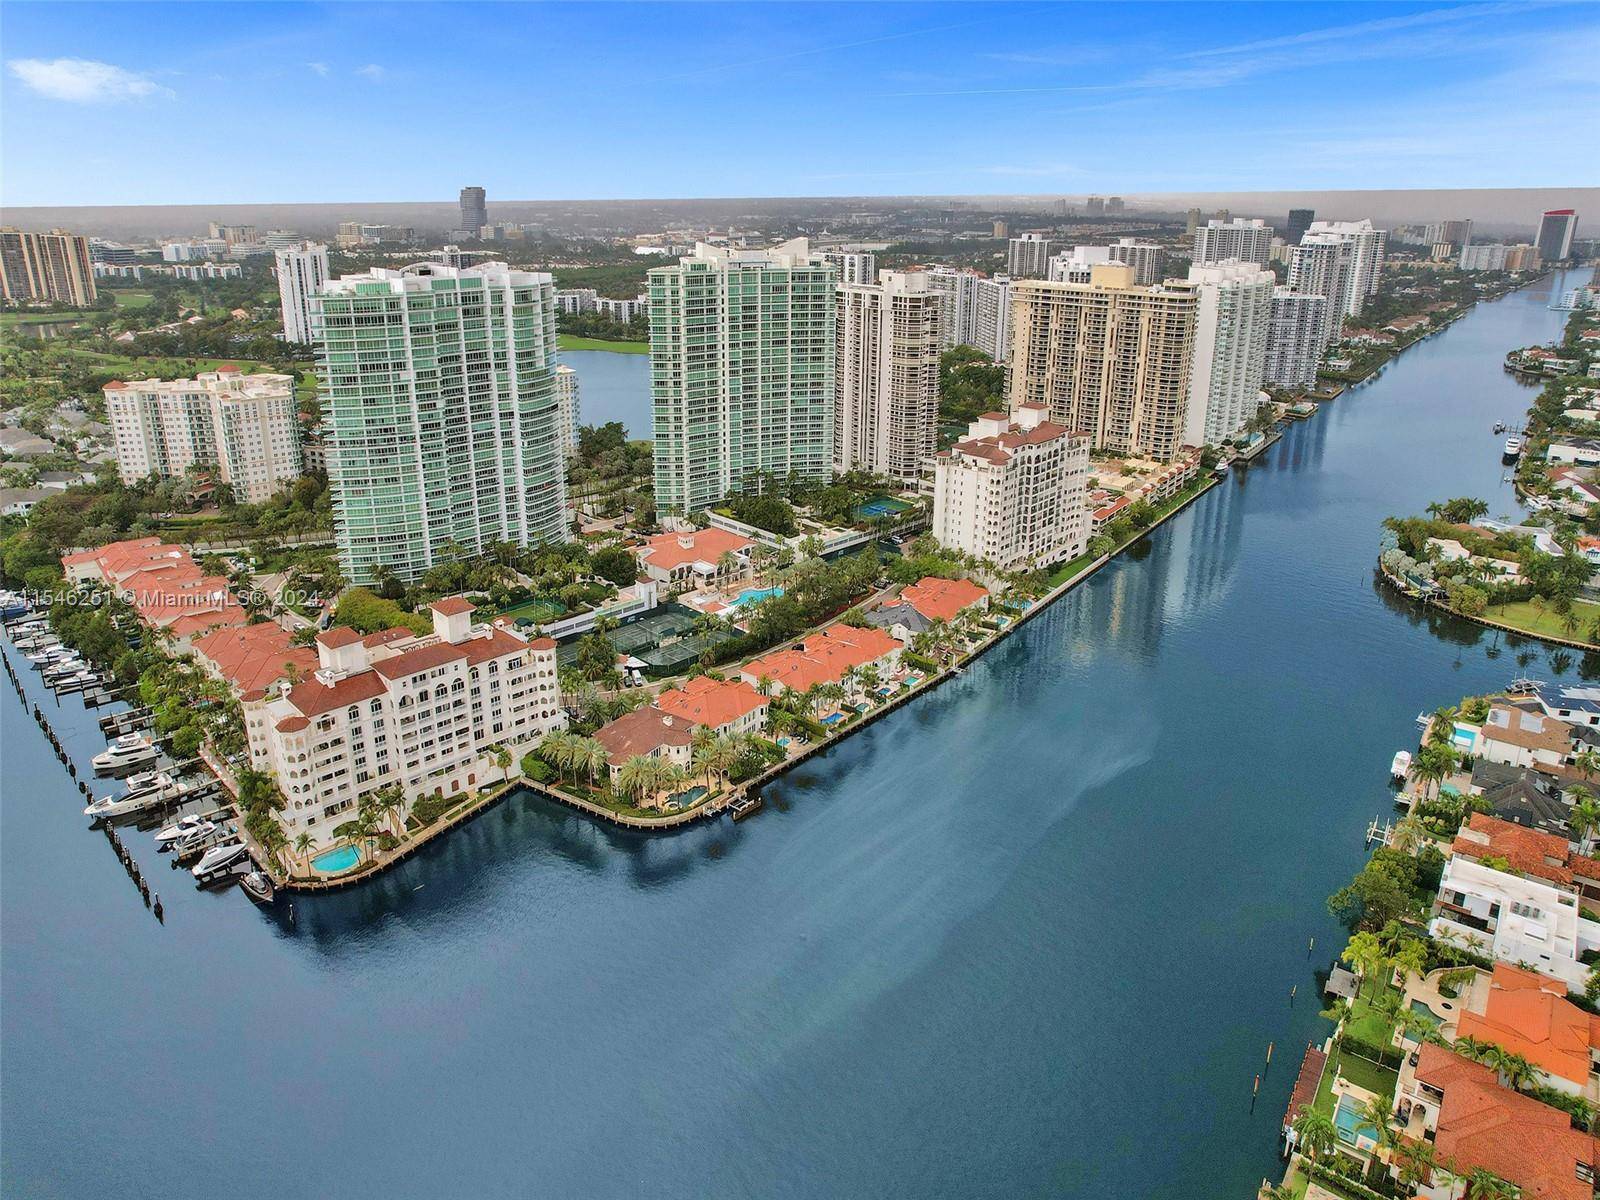 Find your Place in the Porto Vita South Tower and enjoy this beautiful condo, located at the most exclusive and luxurious community in Aventura.